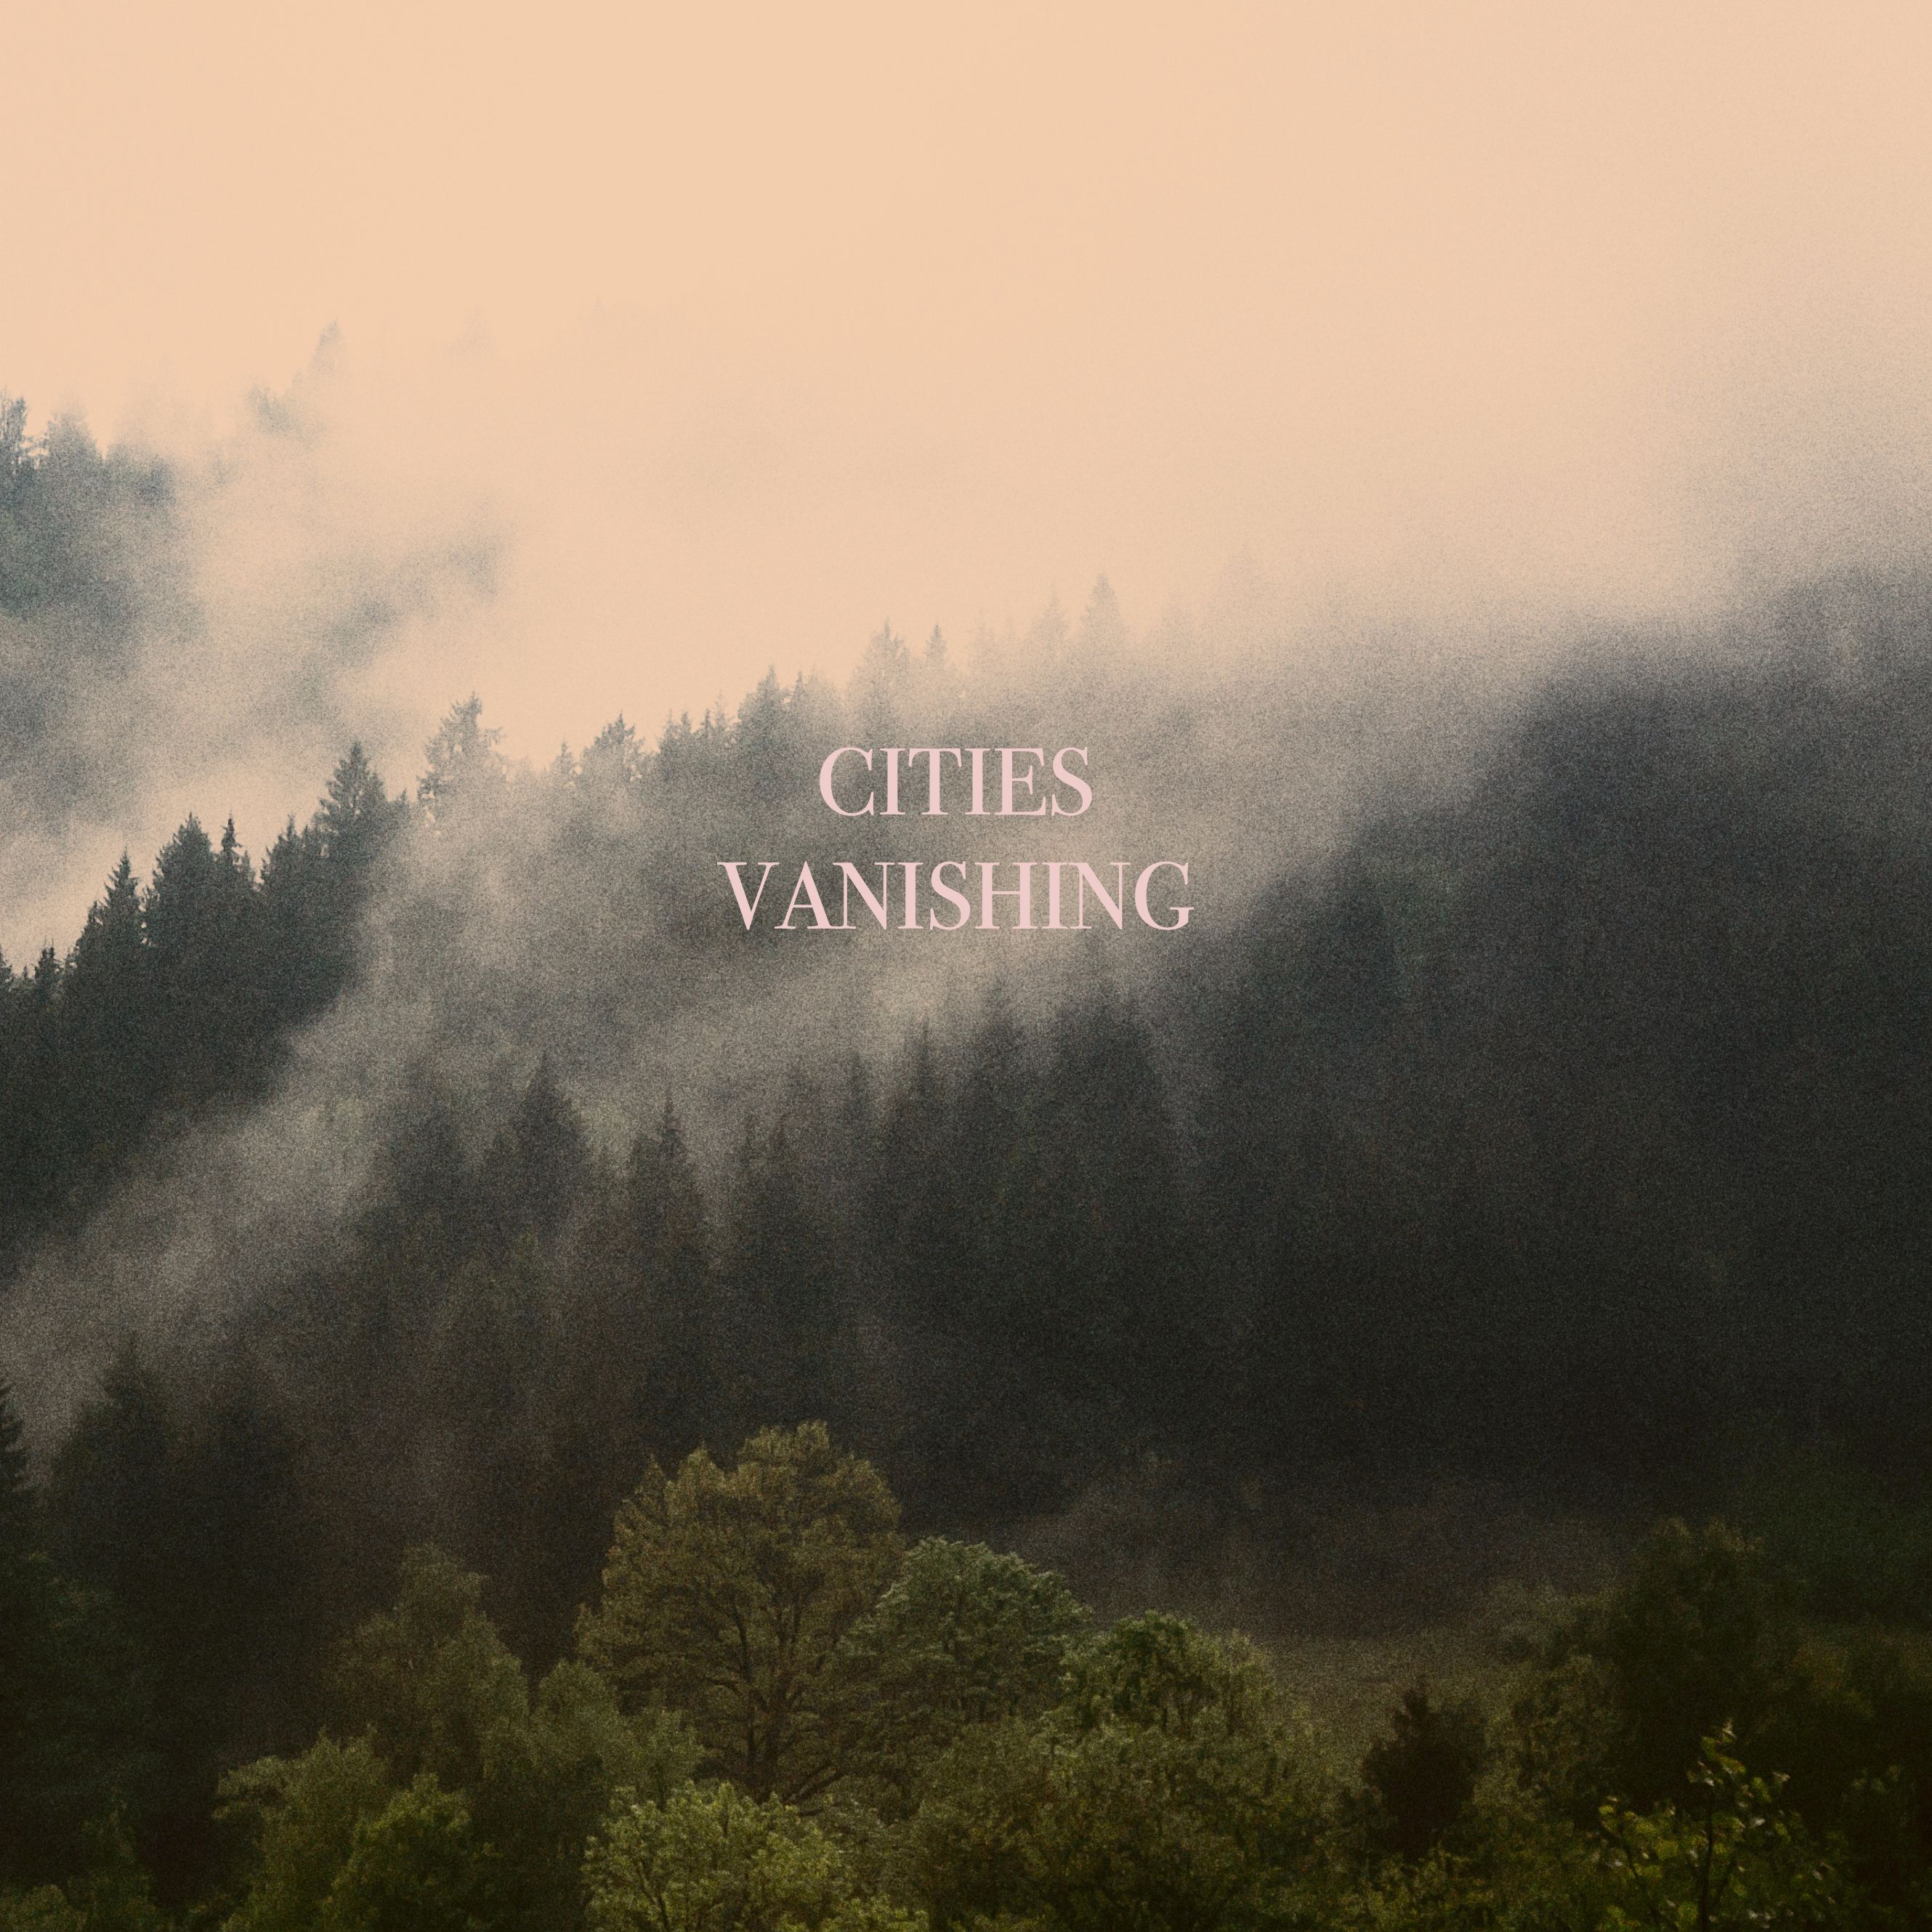 Cities Vanishing – “I Want To Know What The Wind Blows Like”